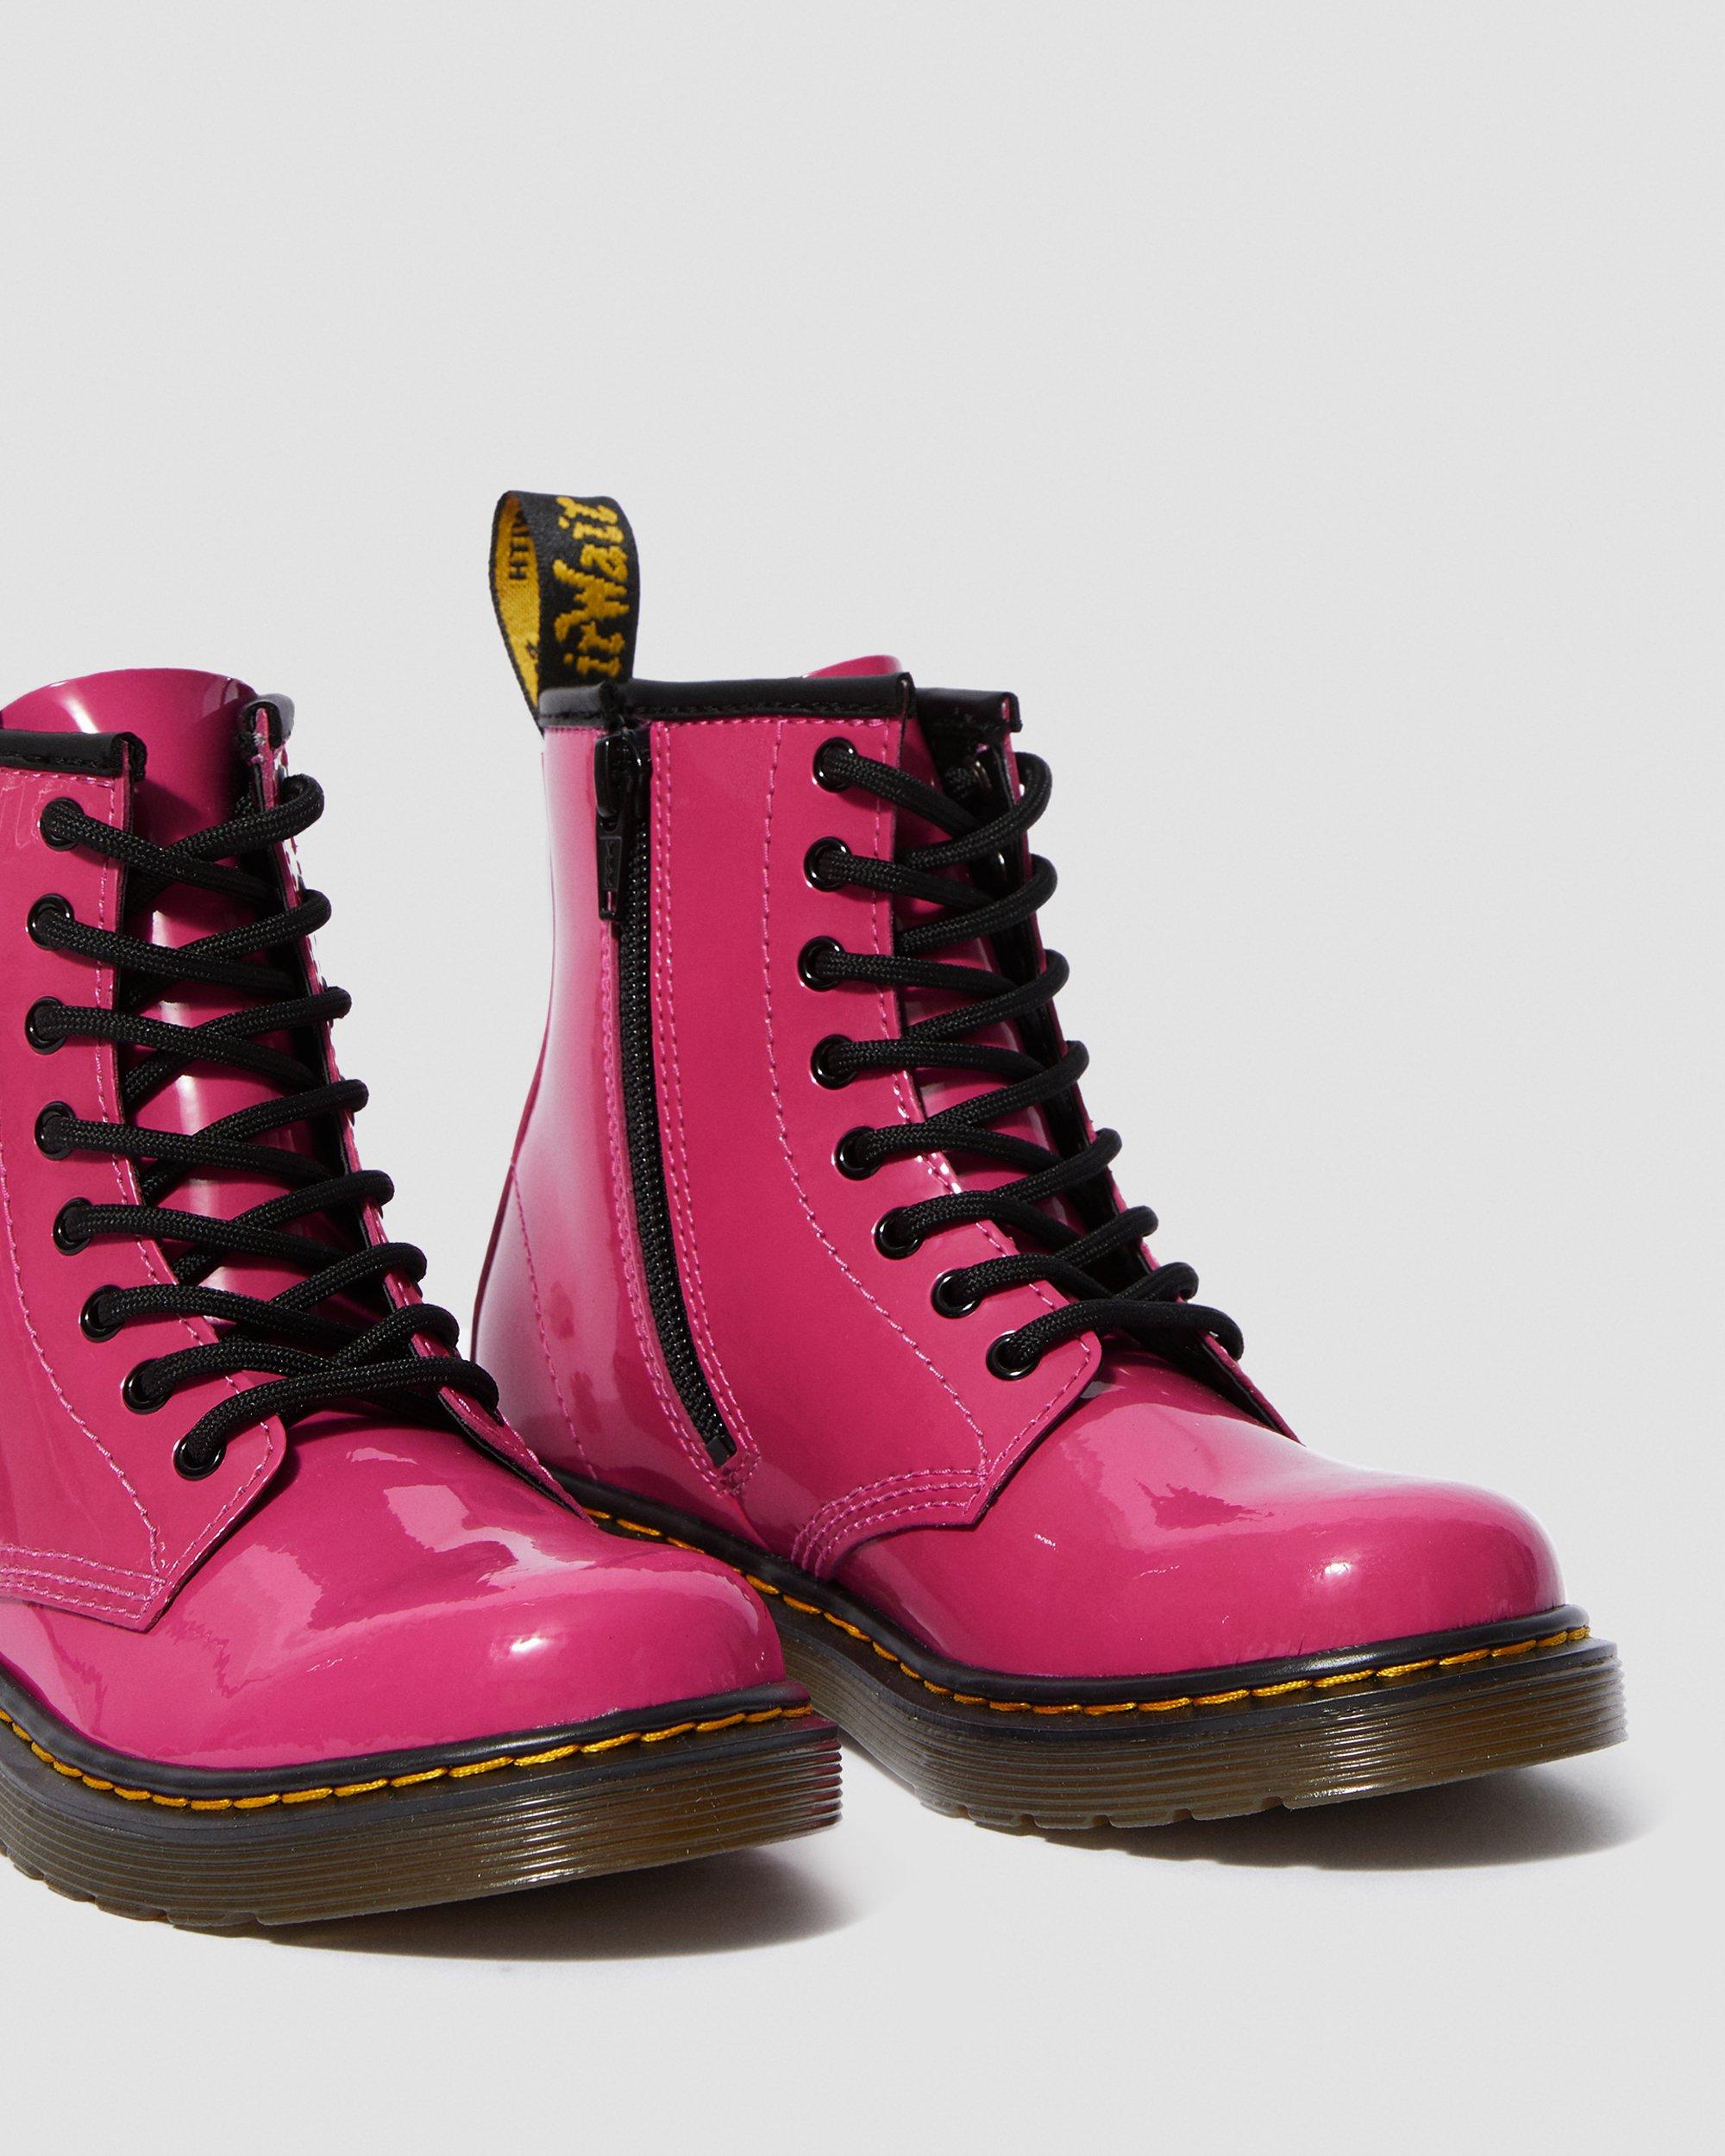 Junior 1460 Patent Leather Lace Up Boots in Hot Pink